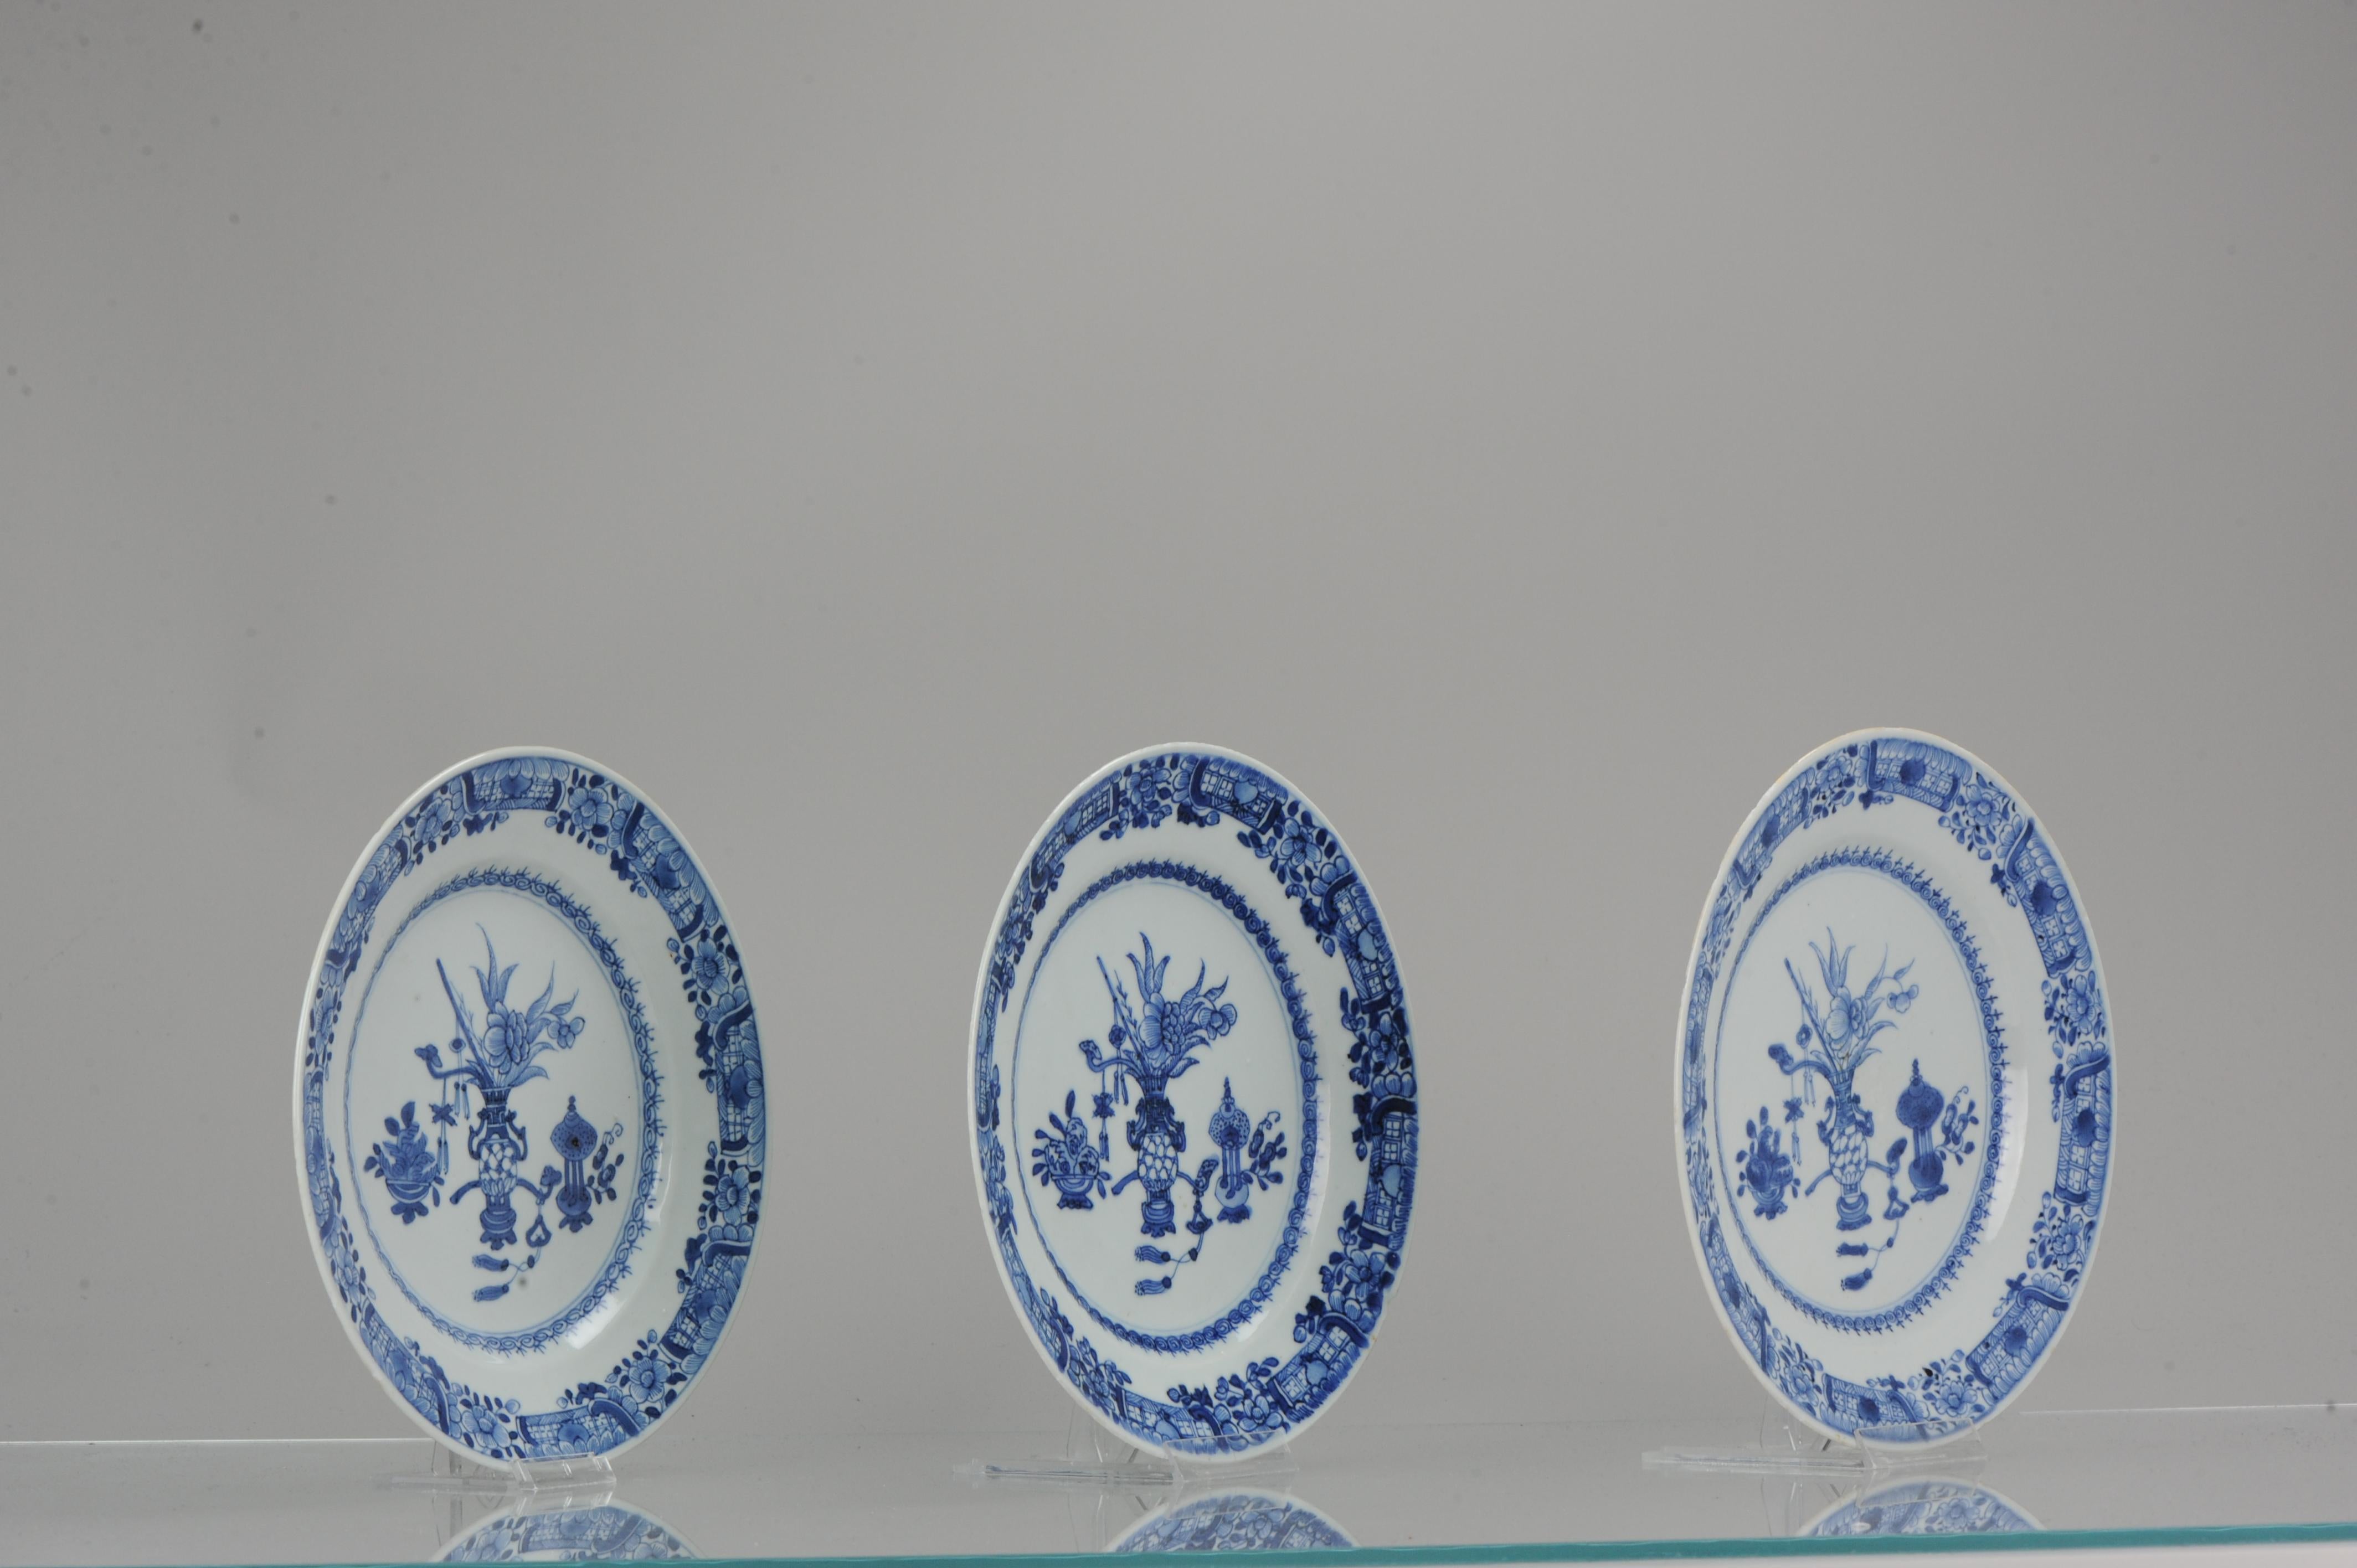 A very nicely decorated set of 3 plates. Dating to circa 1720-1740

Additional information:
Material: Porcelain & Pottery
Region of Origin: China
Period: 18th century Qing (1661 - 1912)
Age: Pre-1800
Condition: Overall Condition 1 with star hairline